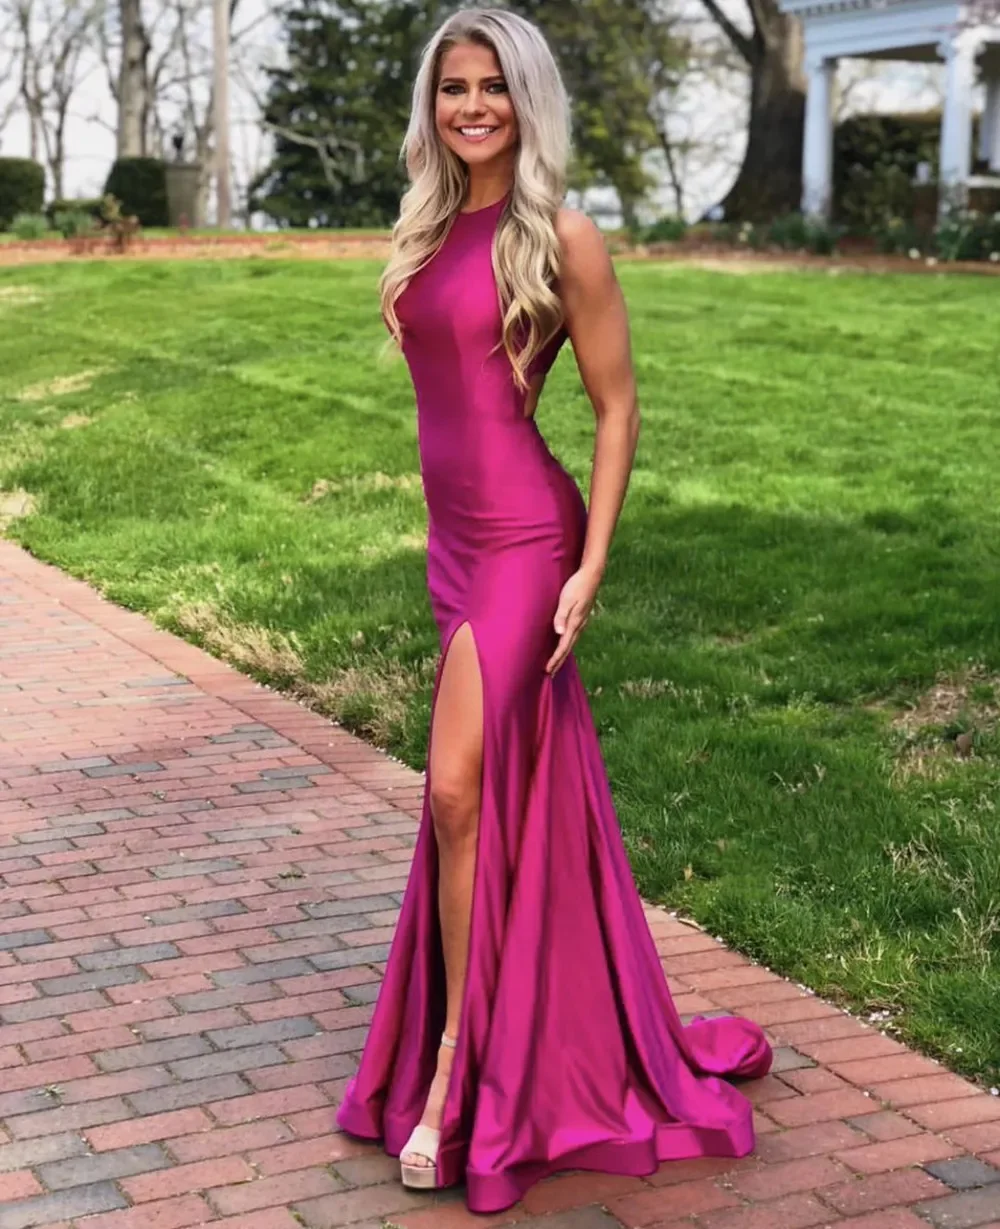 

Sexy Mermaid Round neck Halter Prom Dress Vestido De Festa Evening Gowns with Slit Skirt Cut-out Back Long Party Formal Dress